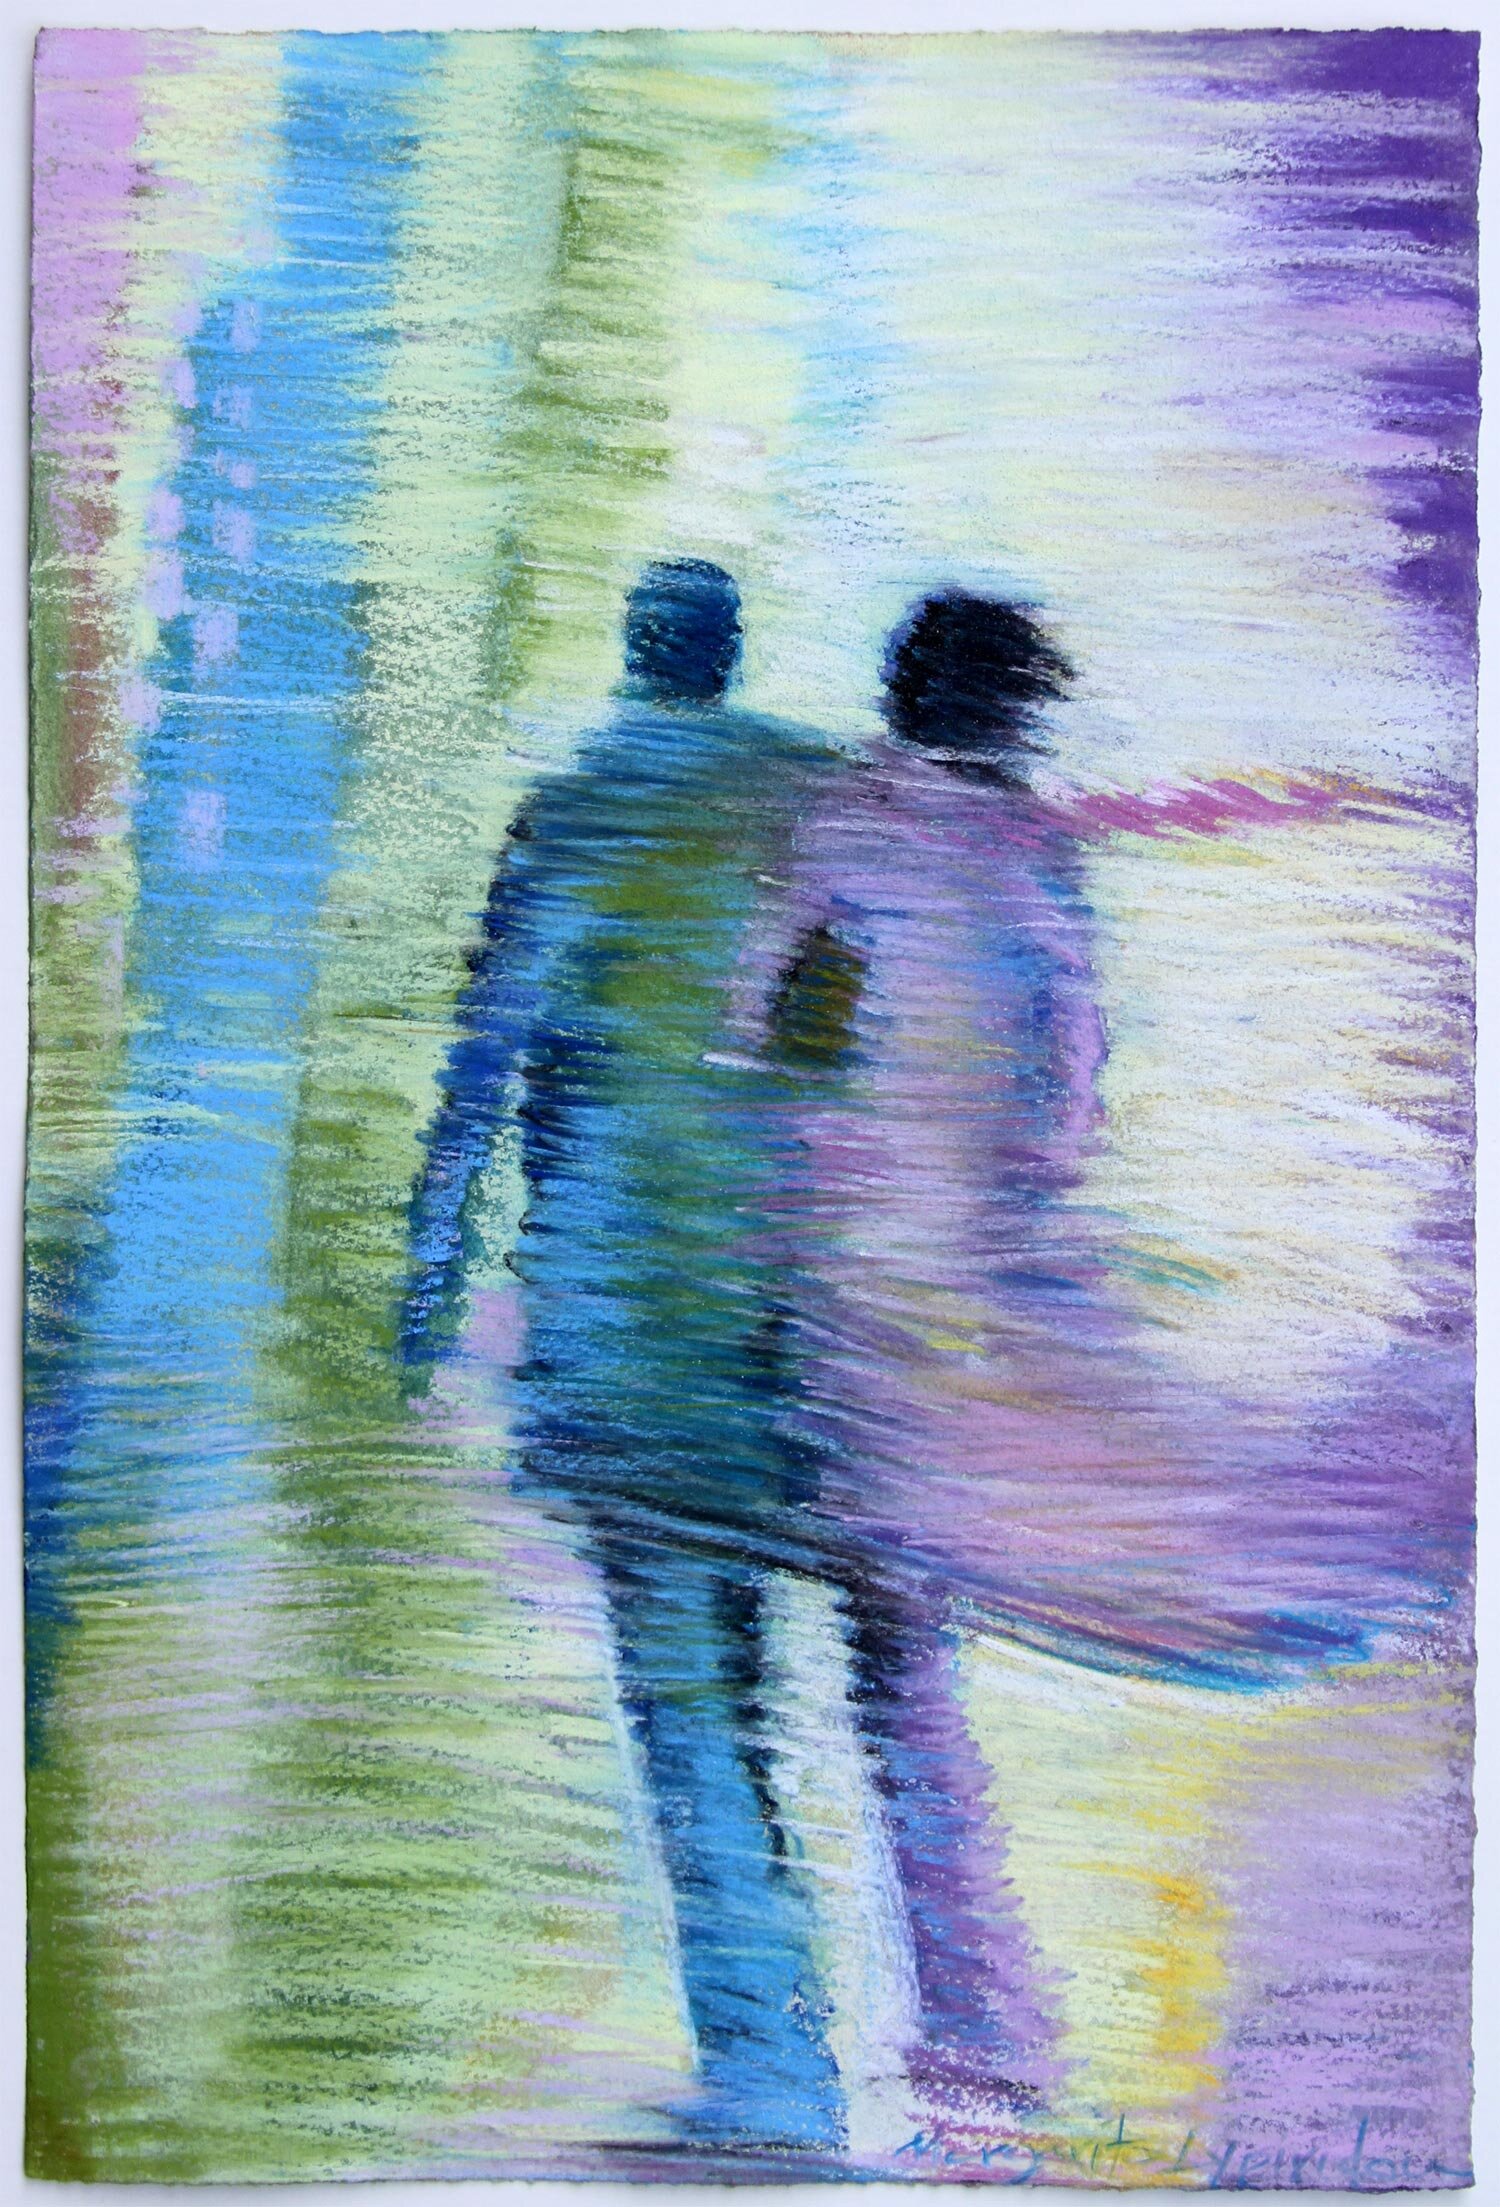 Hurrying Up Together  -  SOLD